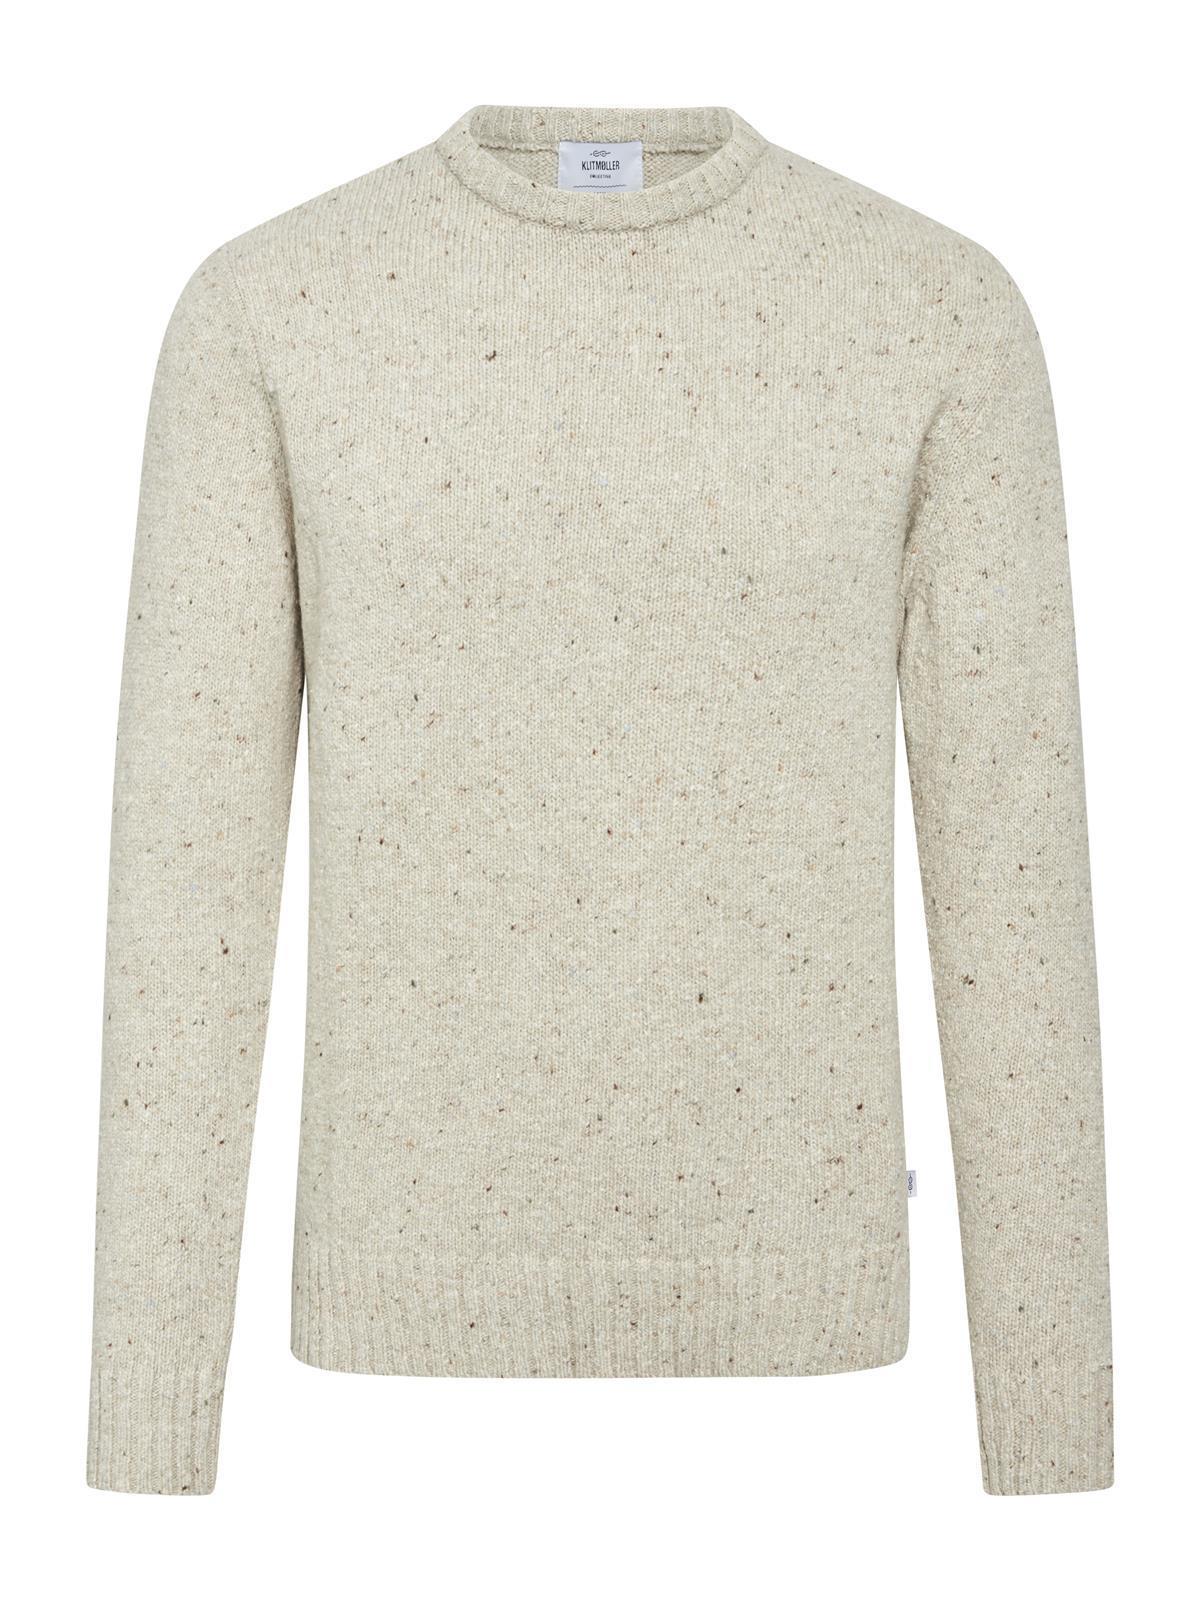 Wollstrick Pullover Modell: Aage